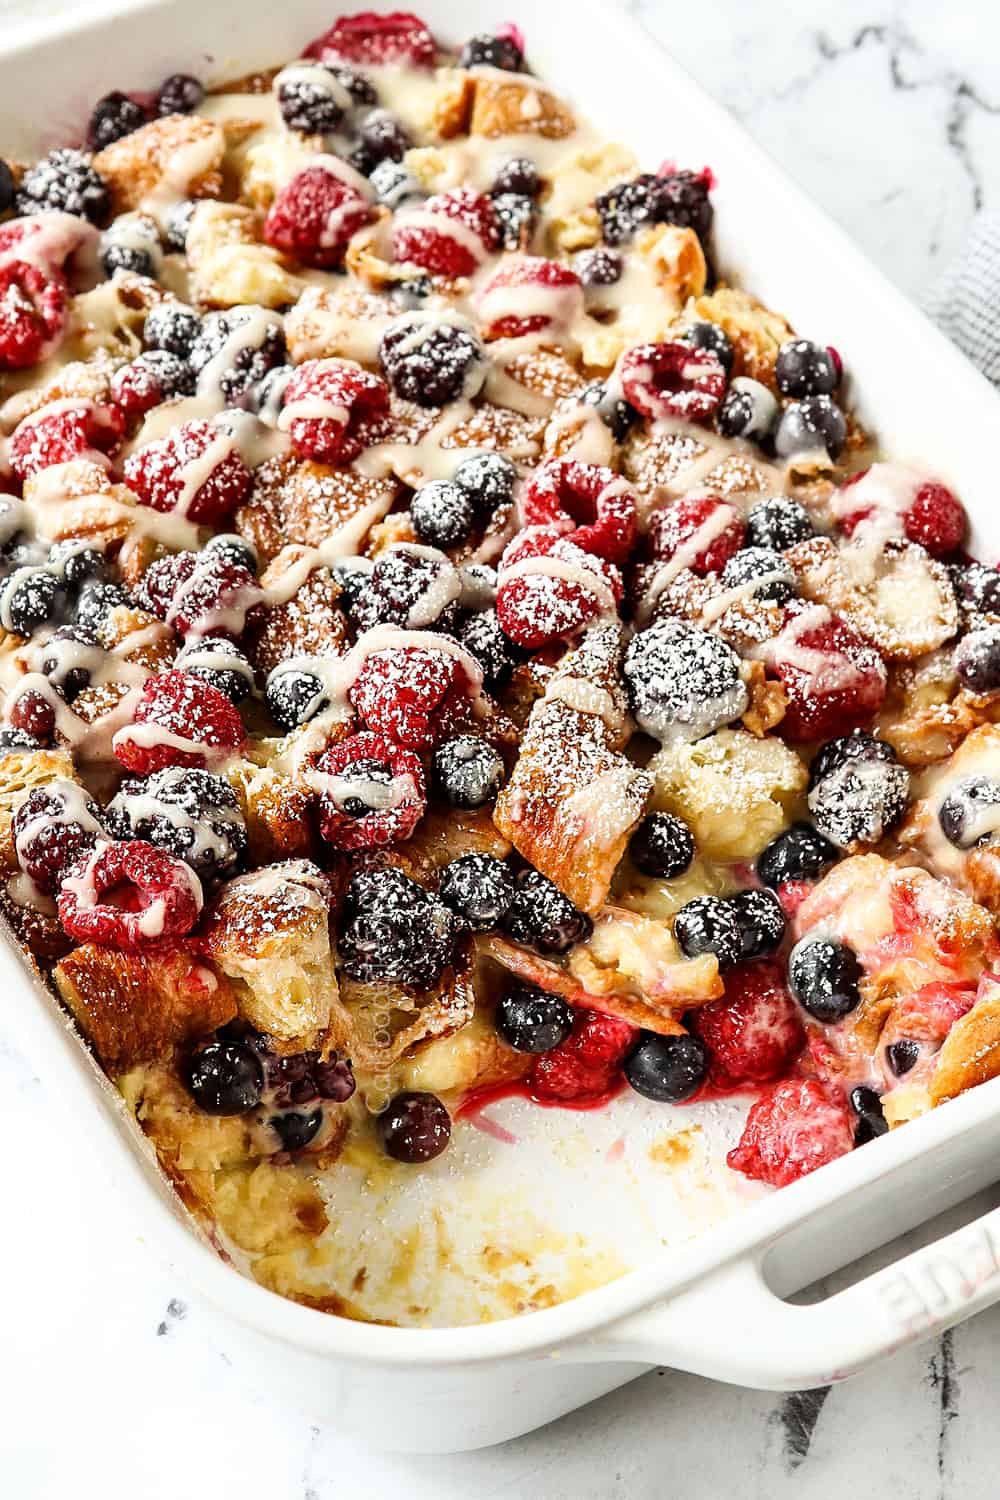 breakfast bake with pieces missing so you can see the inside of the breakfast casserole with croissants and berries